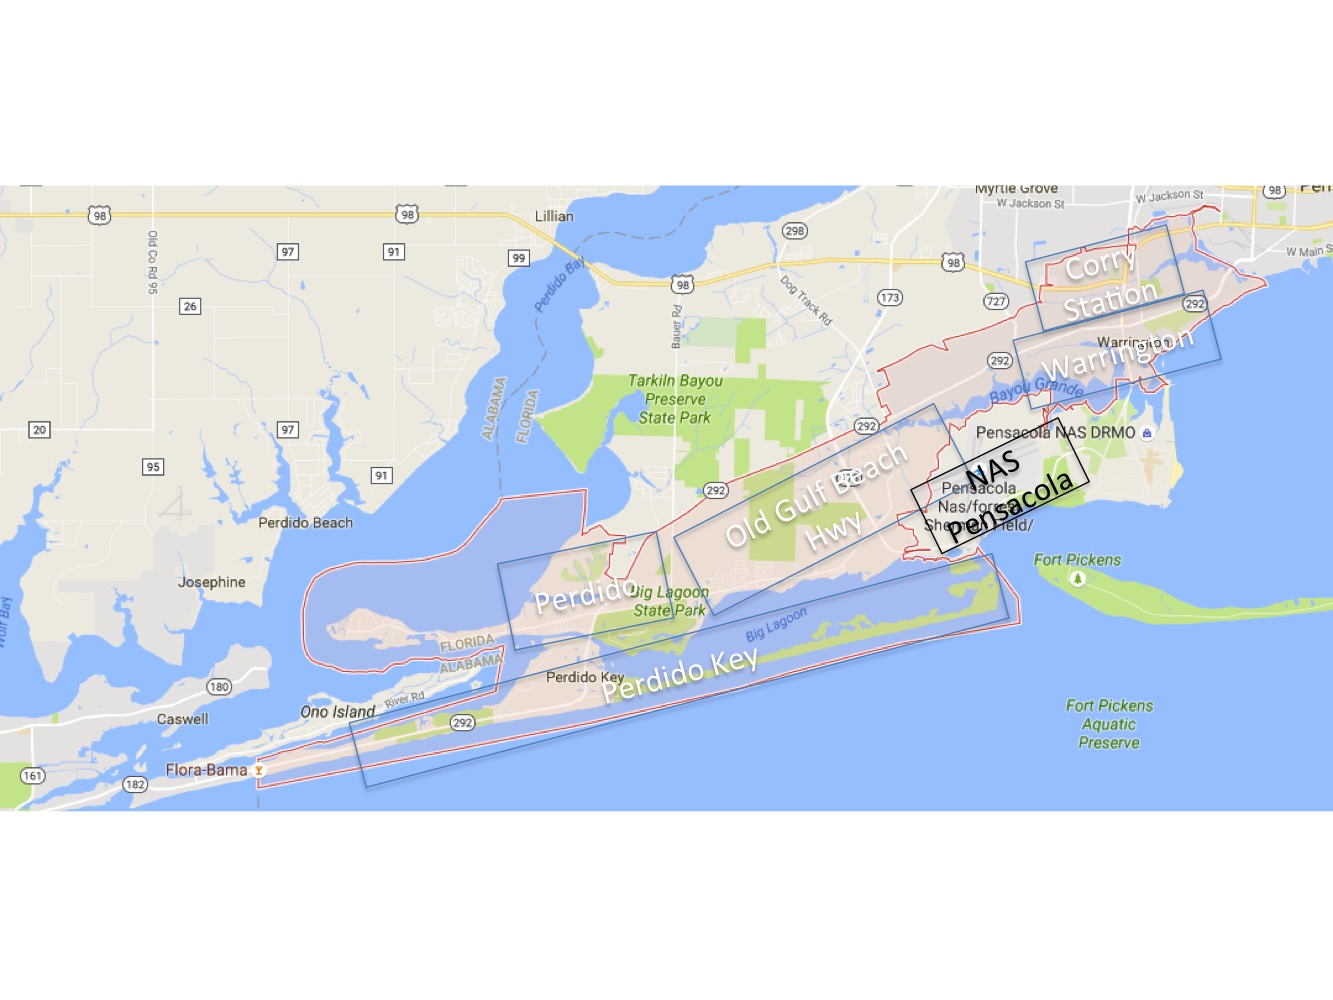 Areas of West Pensacola